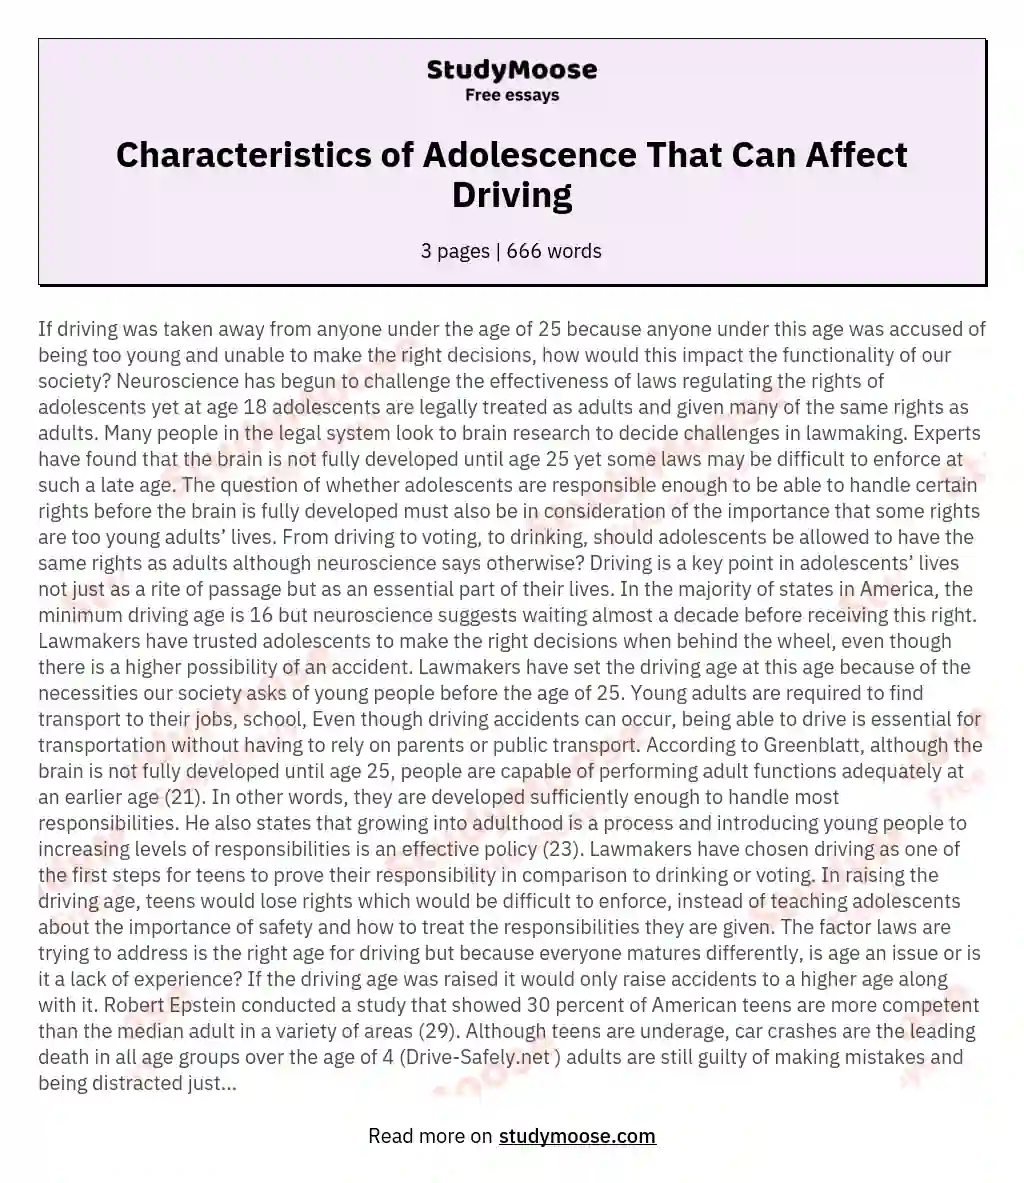 Characteristics of Adolescence That Can Affect Driving